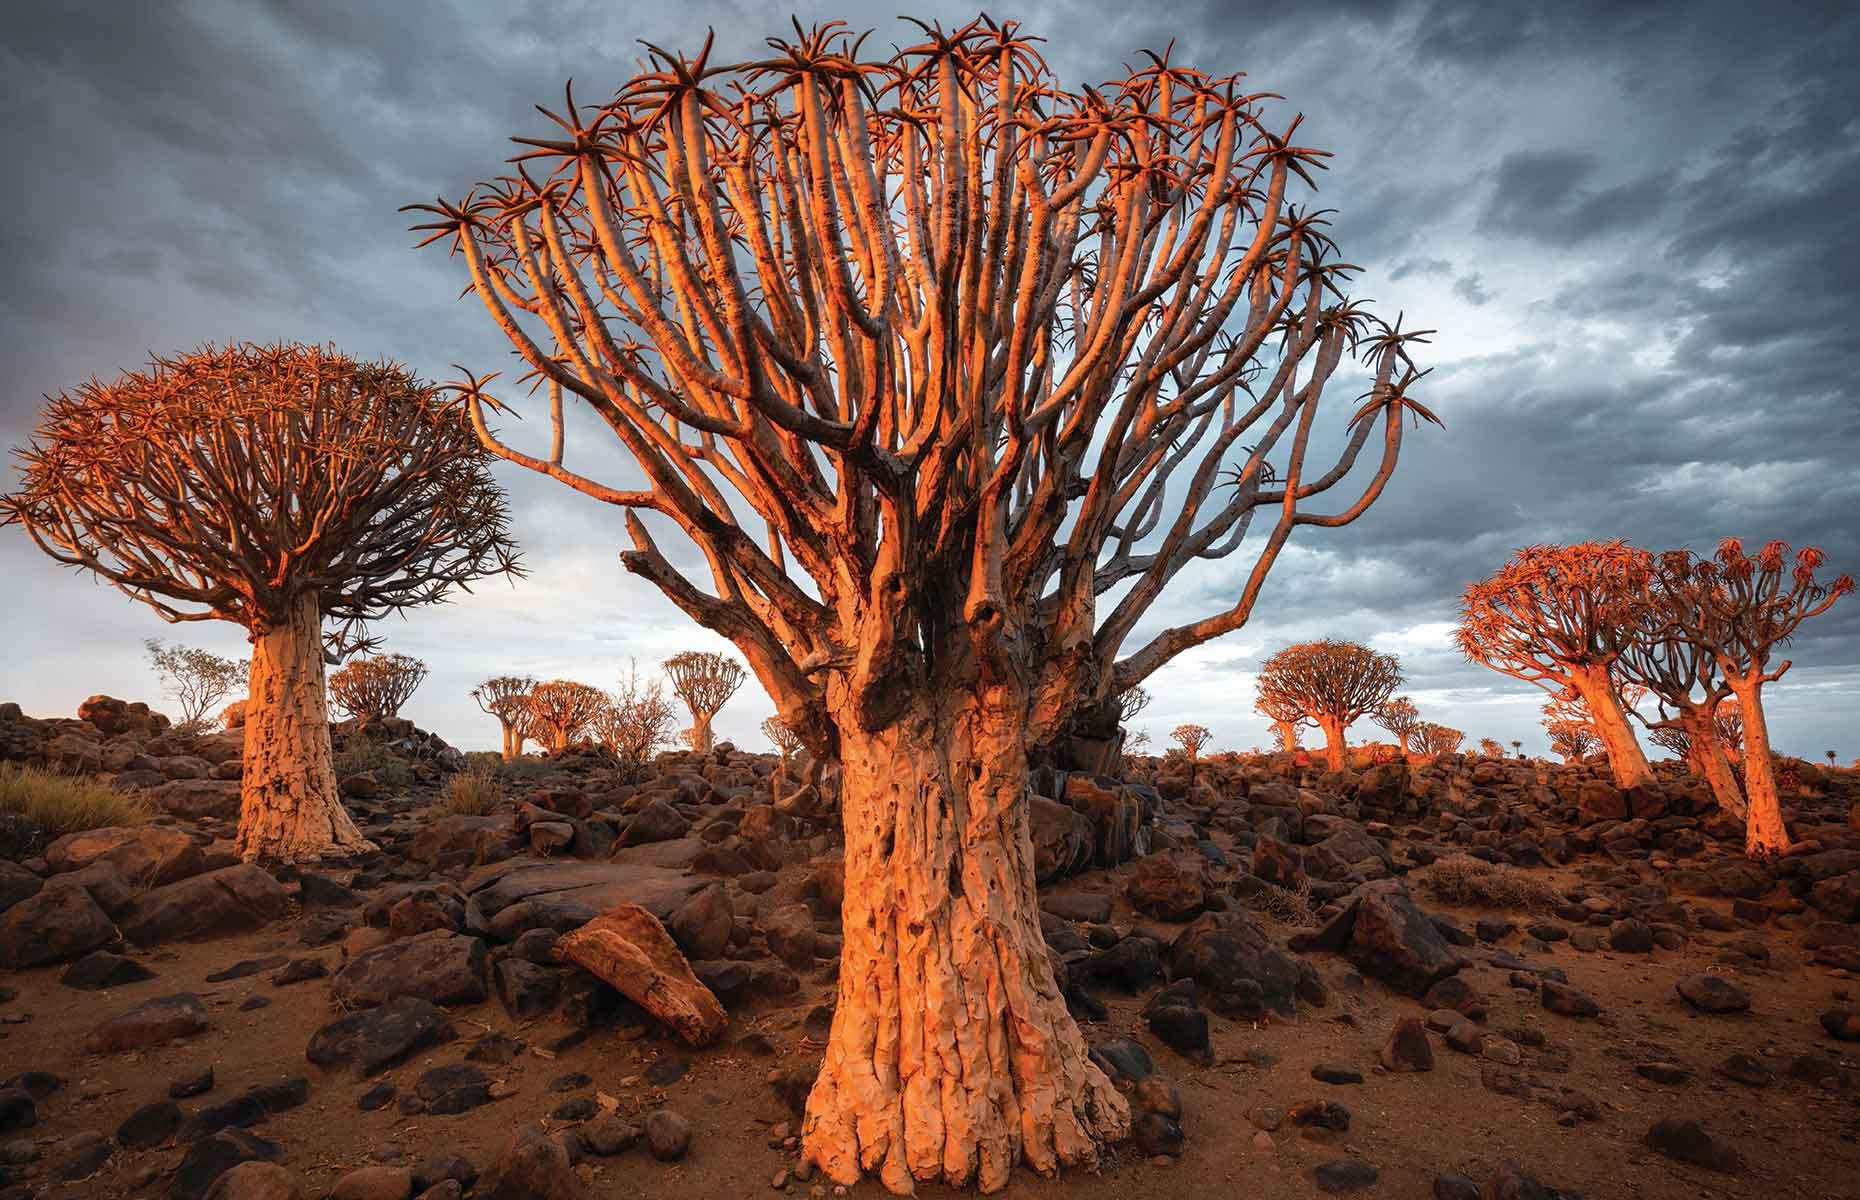 <p>The San people traditionally used the branches of the quiver tree to make quivers. This forest of around 250 quiver trees is one of the few to have grown spontaneously.</p>  <p><a href="https://www.loveexploring.com/gallerylist/85780/the-worlds-most-endangered-rainforests"><strong>These are the world's most endangered forests</strong></a></p>